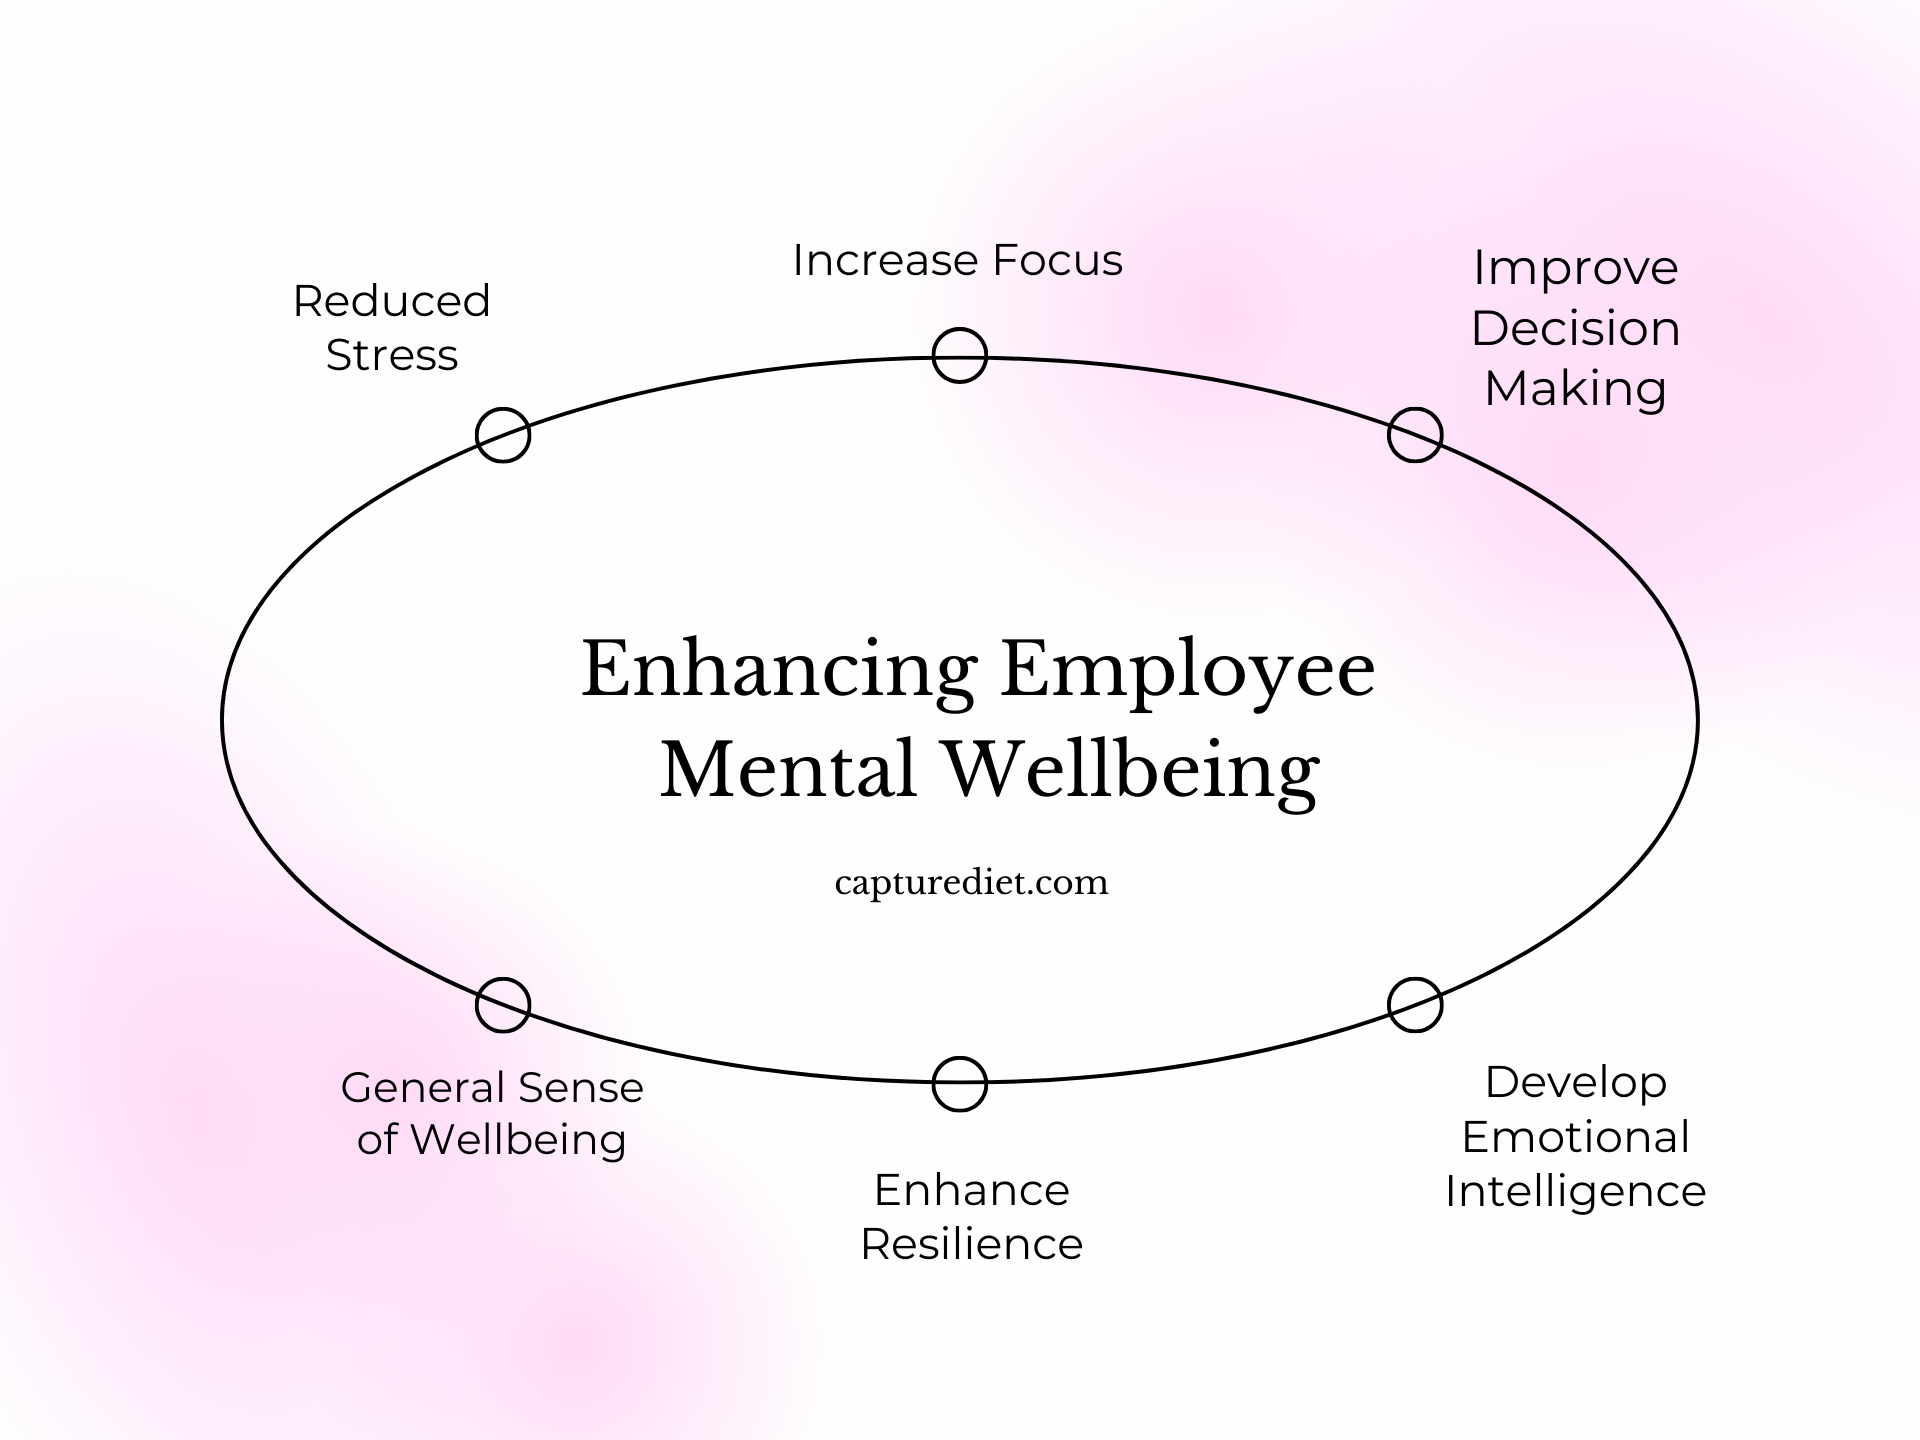 "Mindfulness and Meditation: Enhancing Employee Mental Wellbeing"